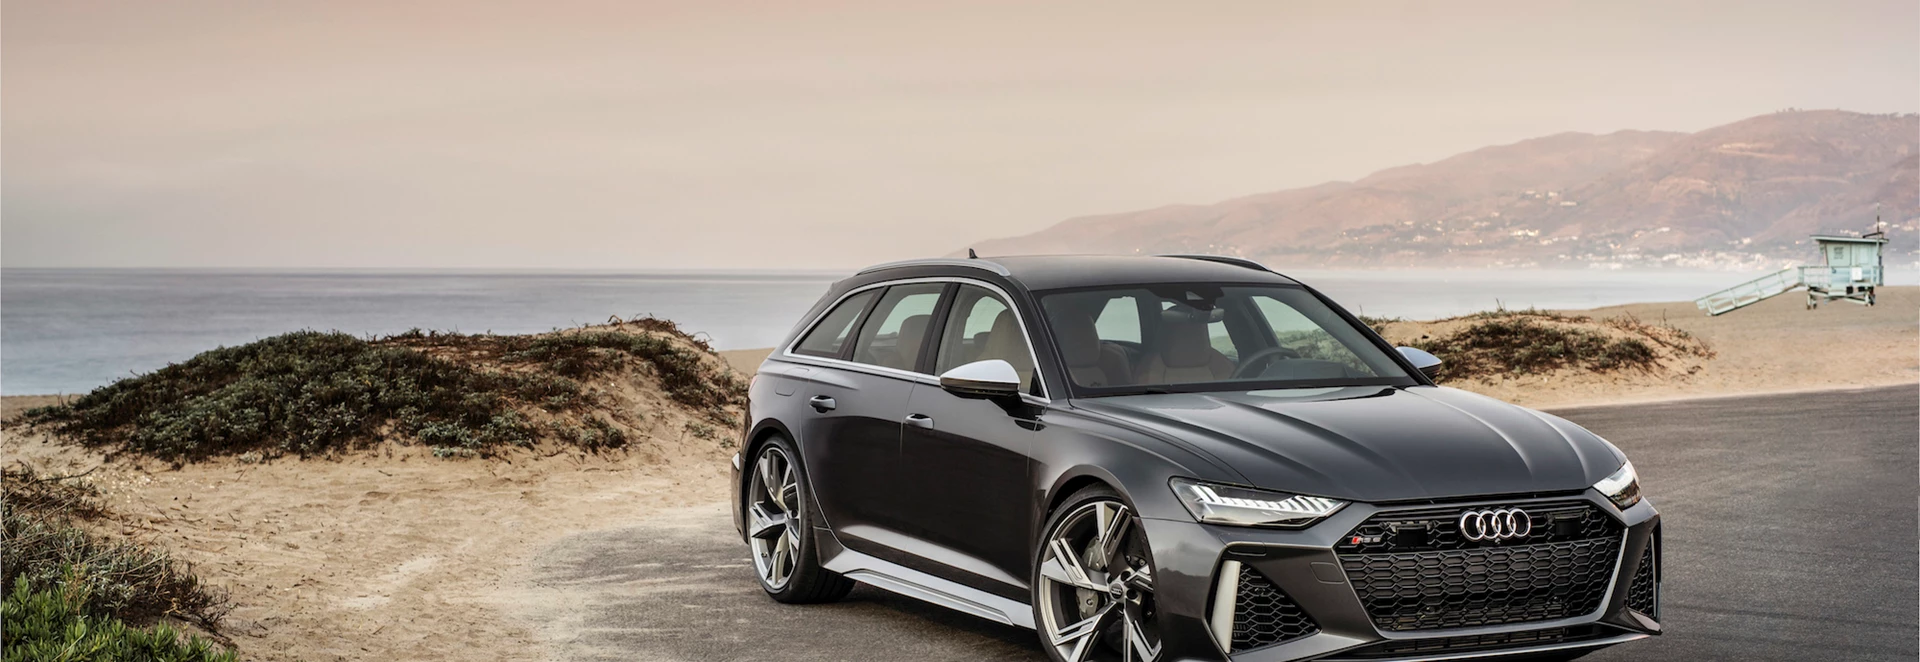 Order books open for 2020 Audi RS6 and RS7